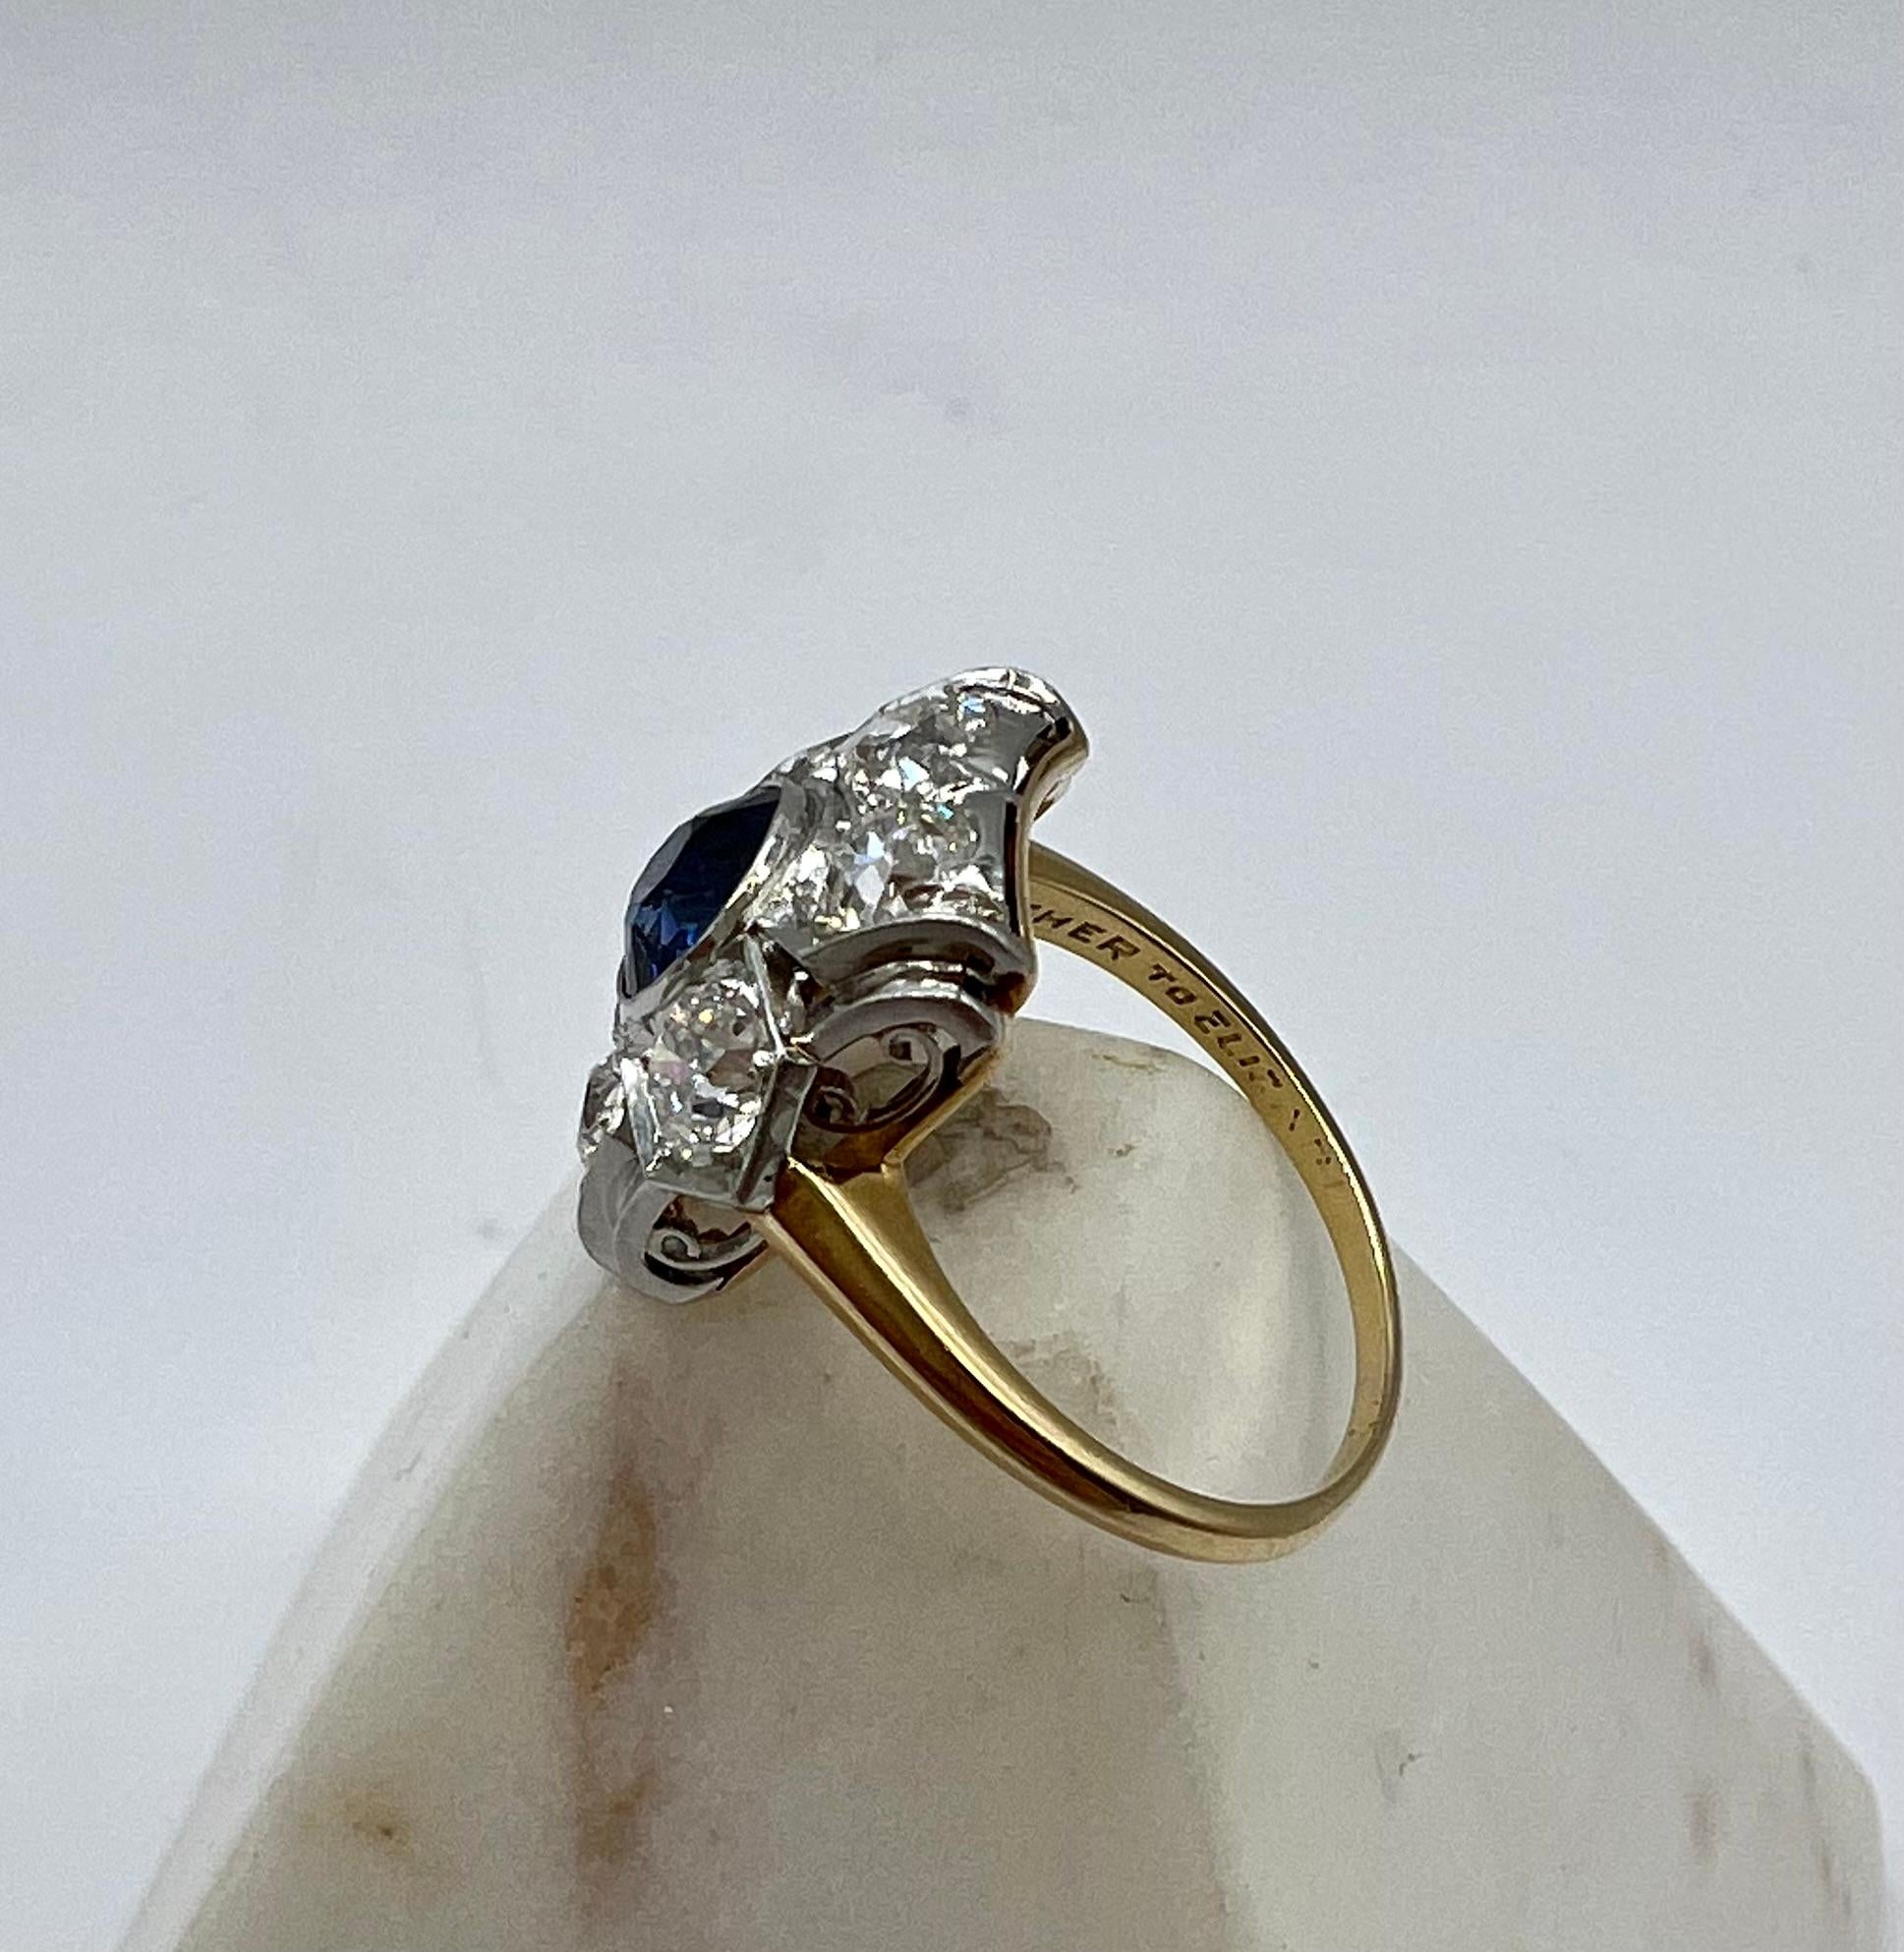 This spectacular diamond and sapphire ring is a stunner. With 2 carats of bright white diamonds surrounded by a 1.05 carat deep blue sapphire set in platinum. The band is 14 karat yellow gold. The ring is 7 1/4 and can be sized.